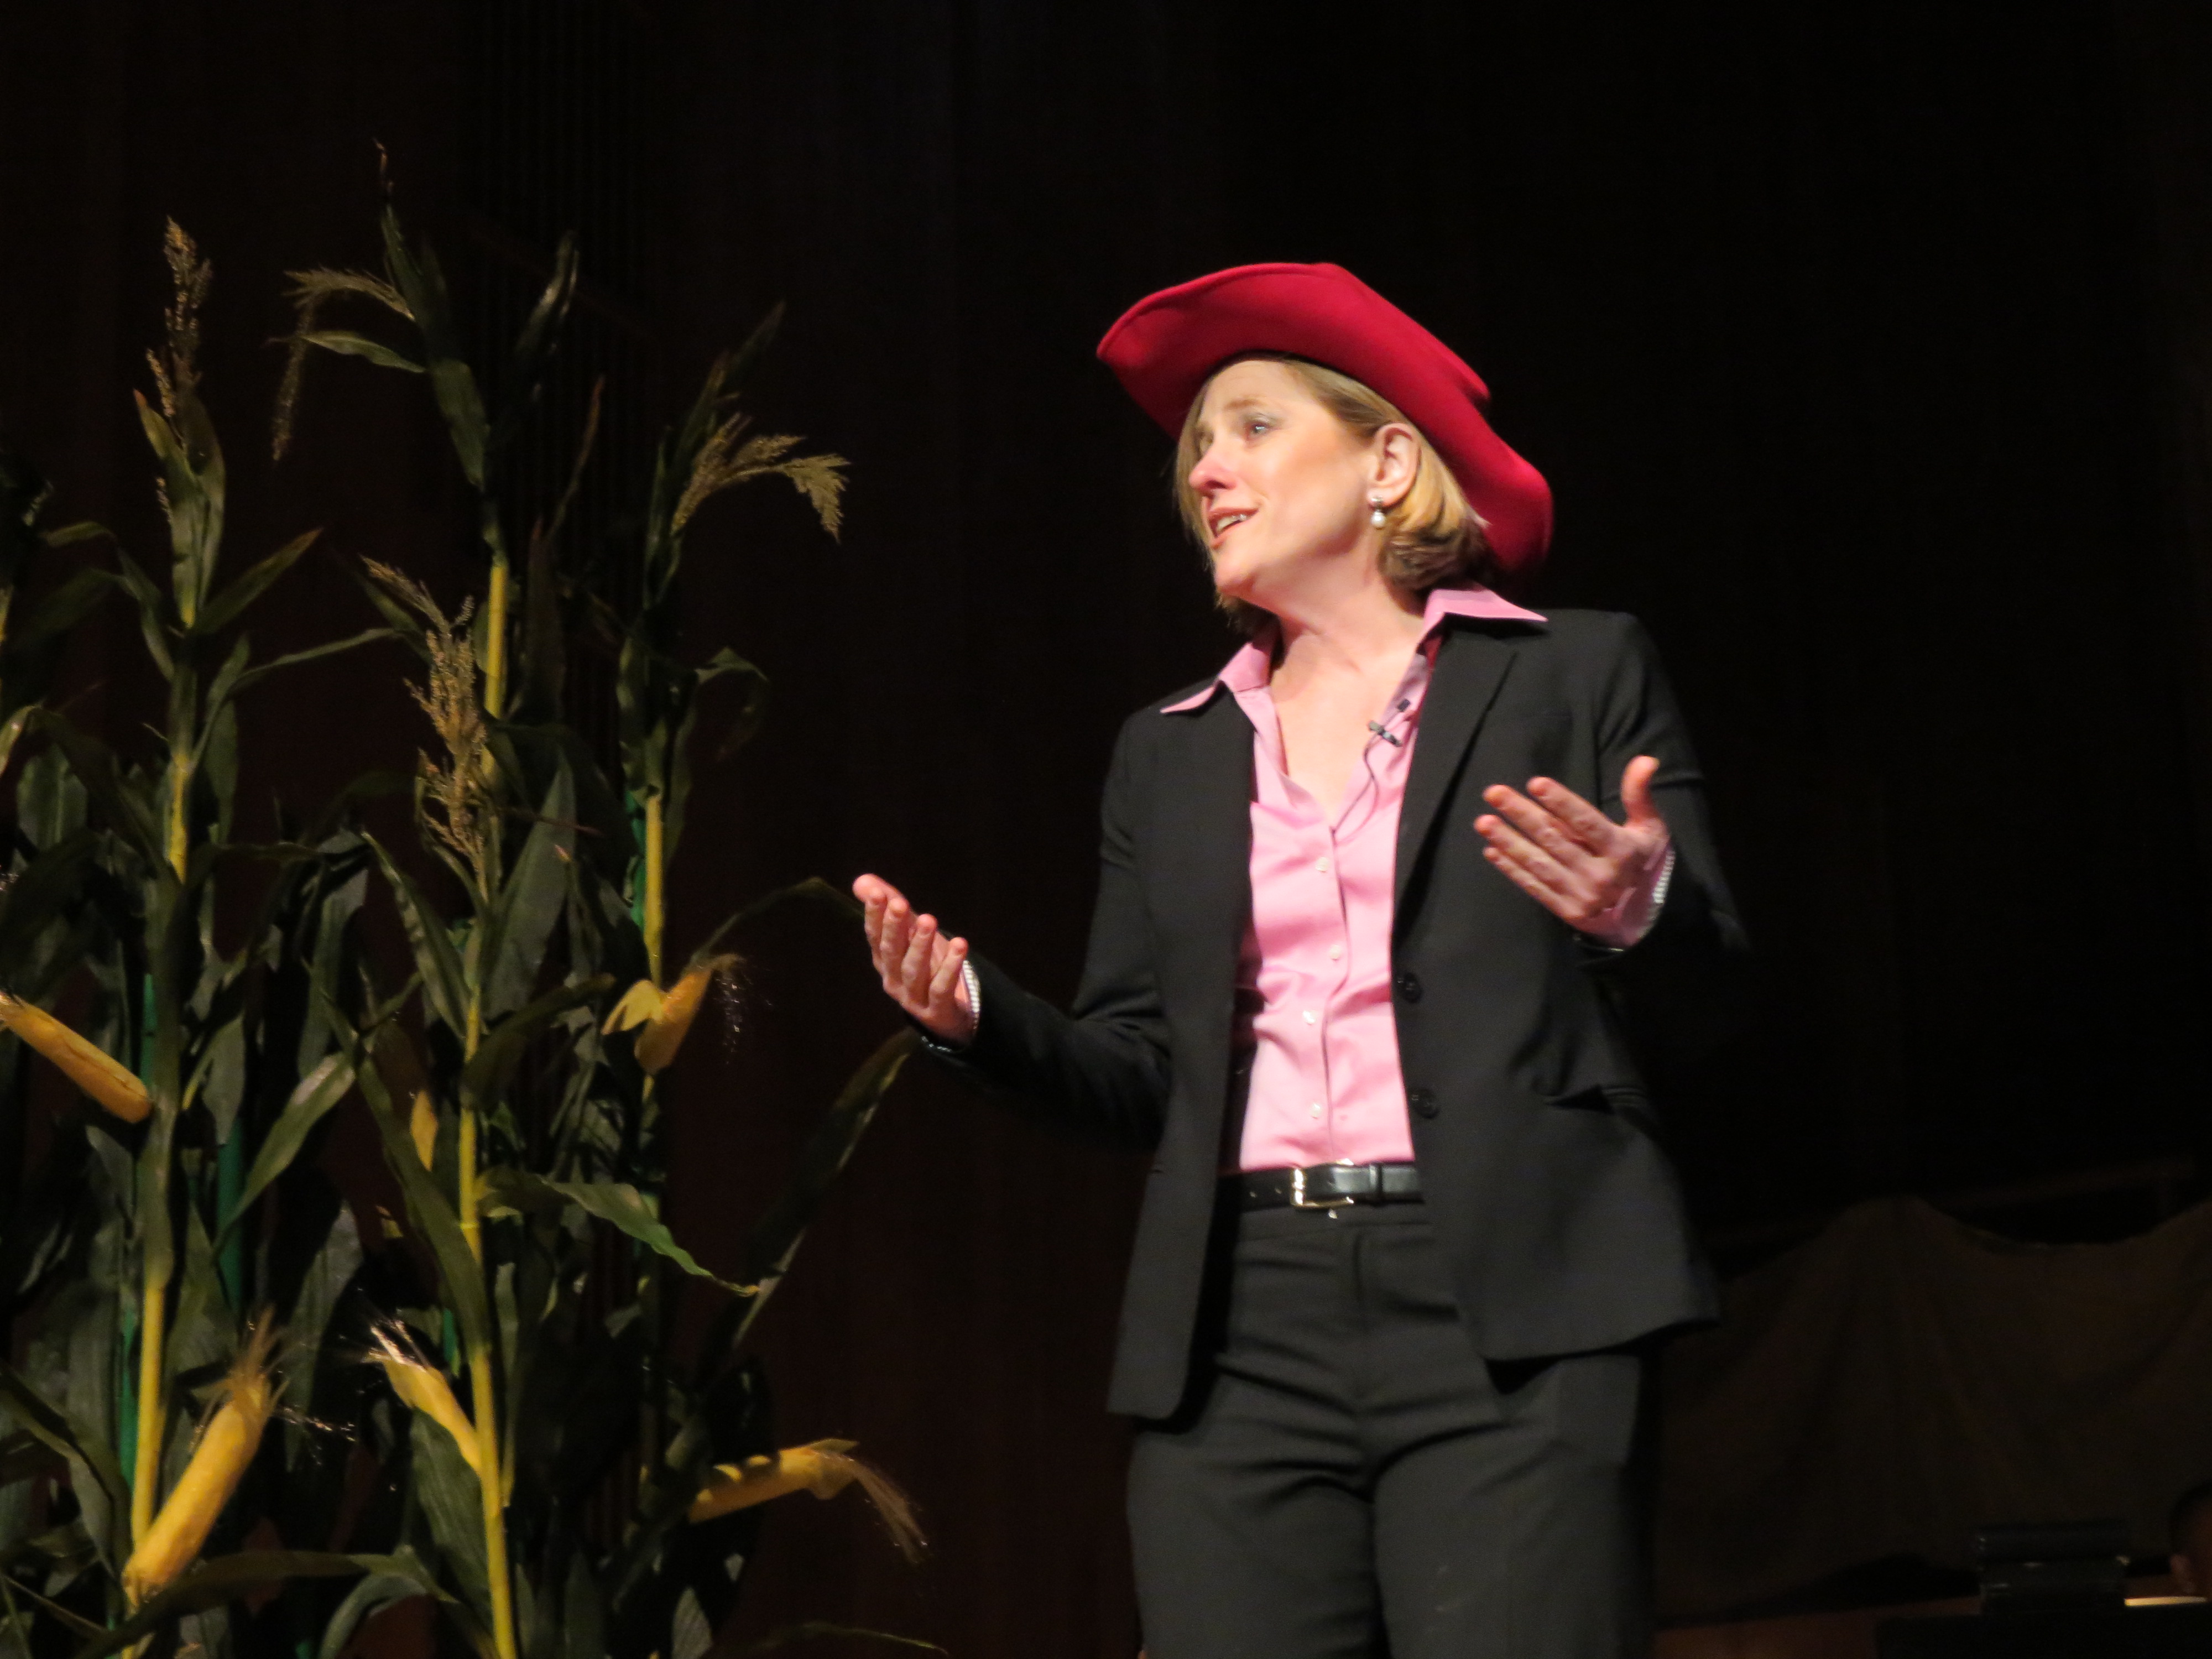 Borough President-elect Melinda Katz launched the evening's repertoire with a Queensified version of "Oh, What a Beautiful Morning!" from the Broadway show "Oklahoma."